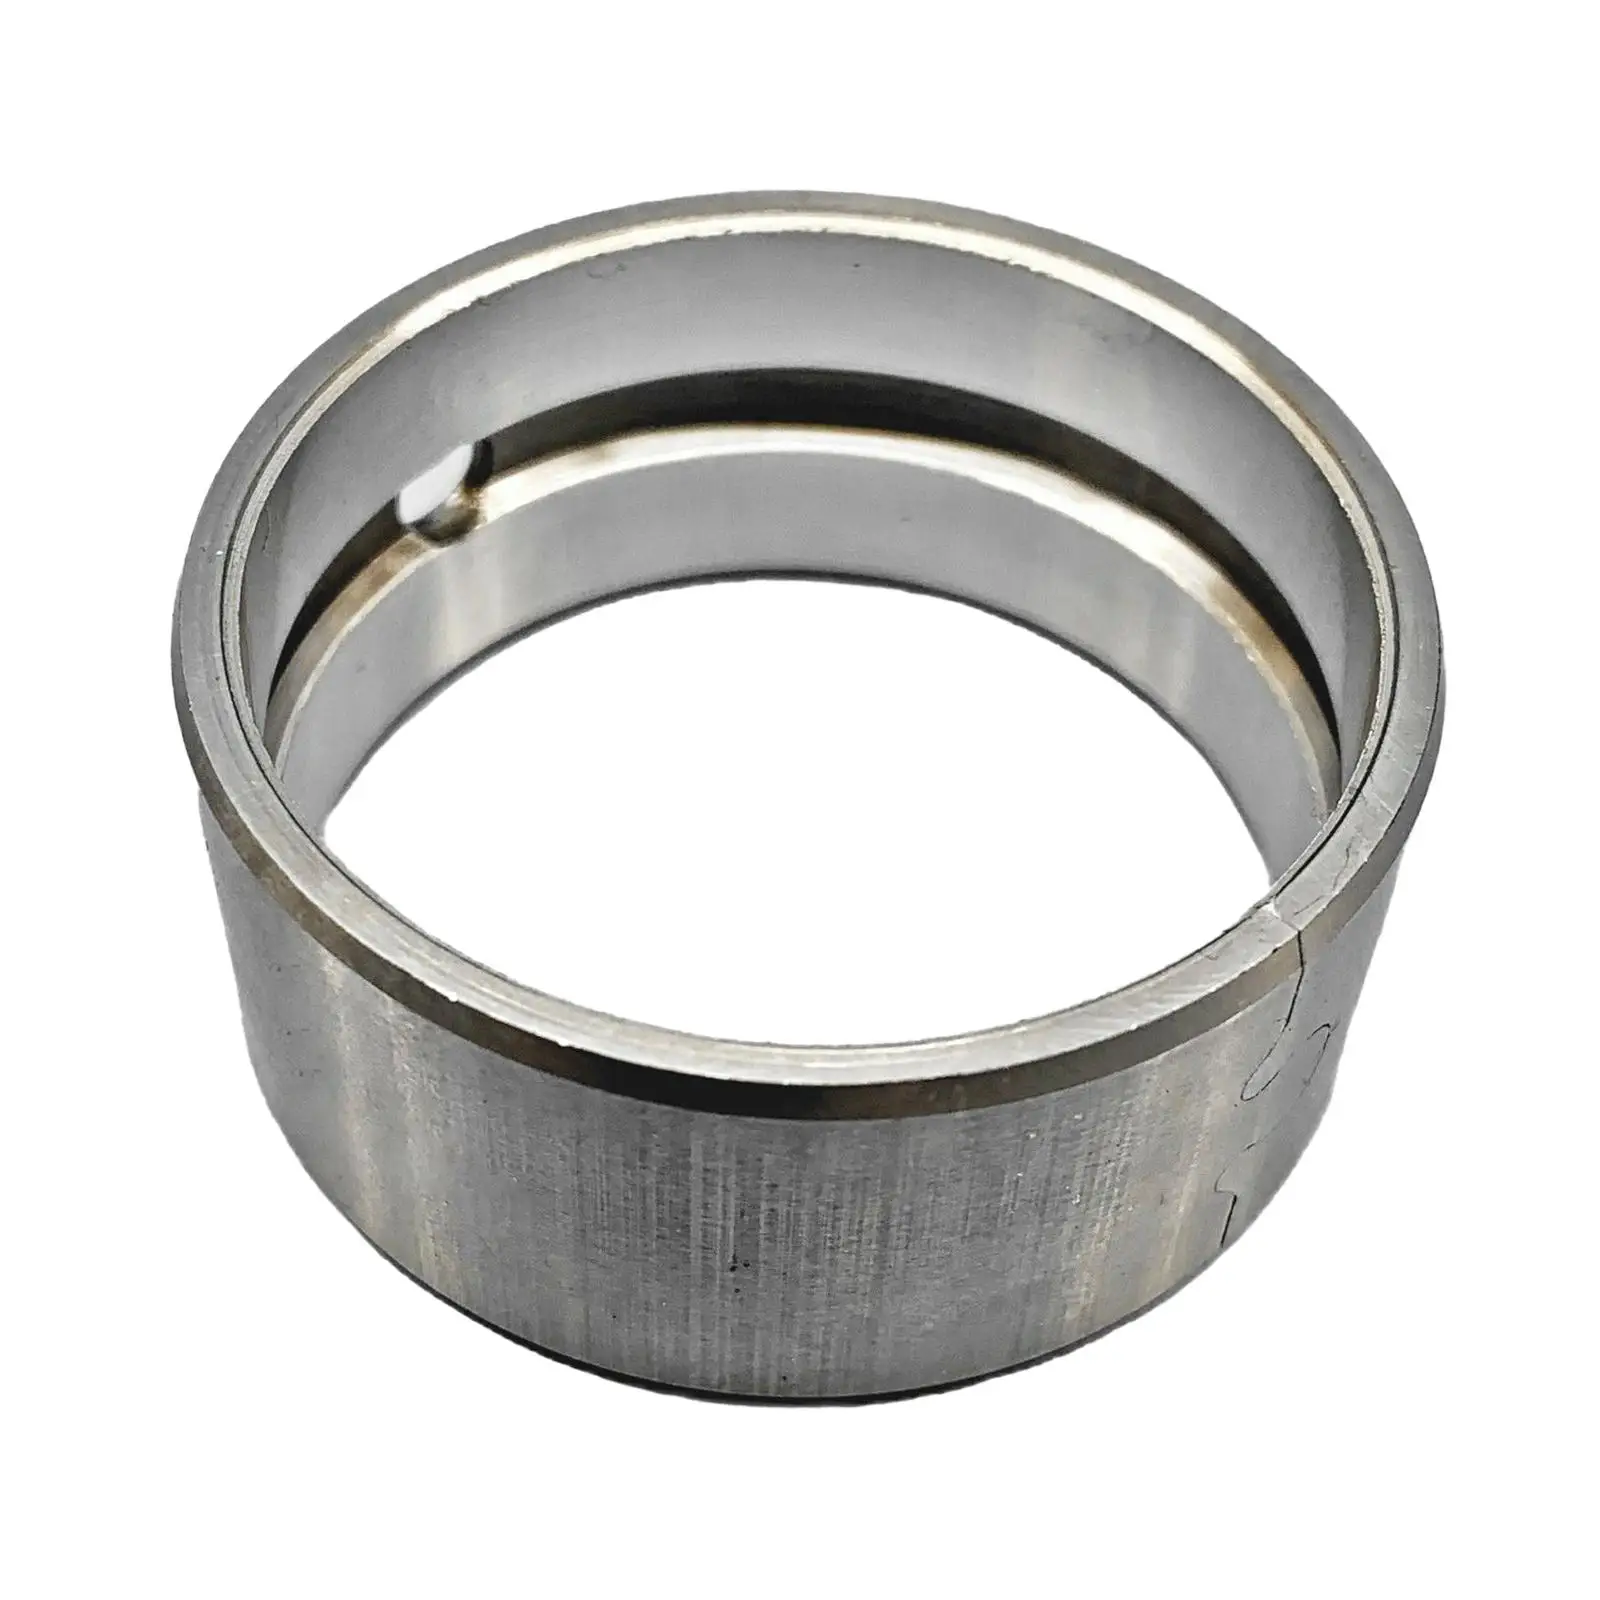 Crank Main Bearing Bushing Replaces Assembly for Polaris 570 450HO 450 Automobile Repairing Accessory Stable Performance